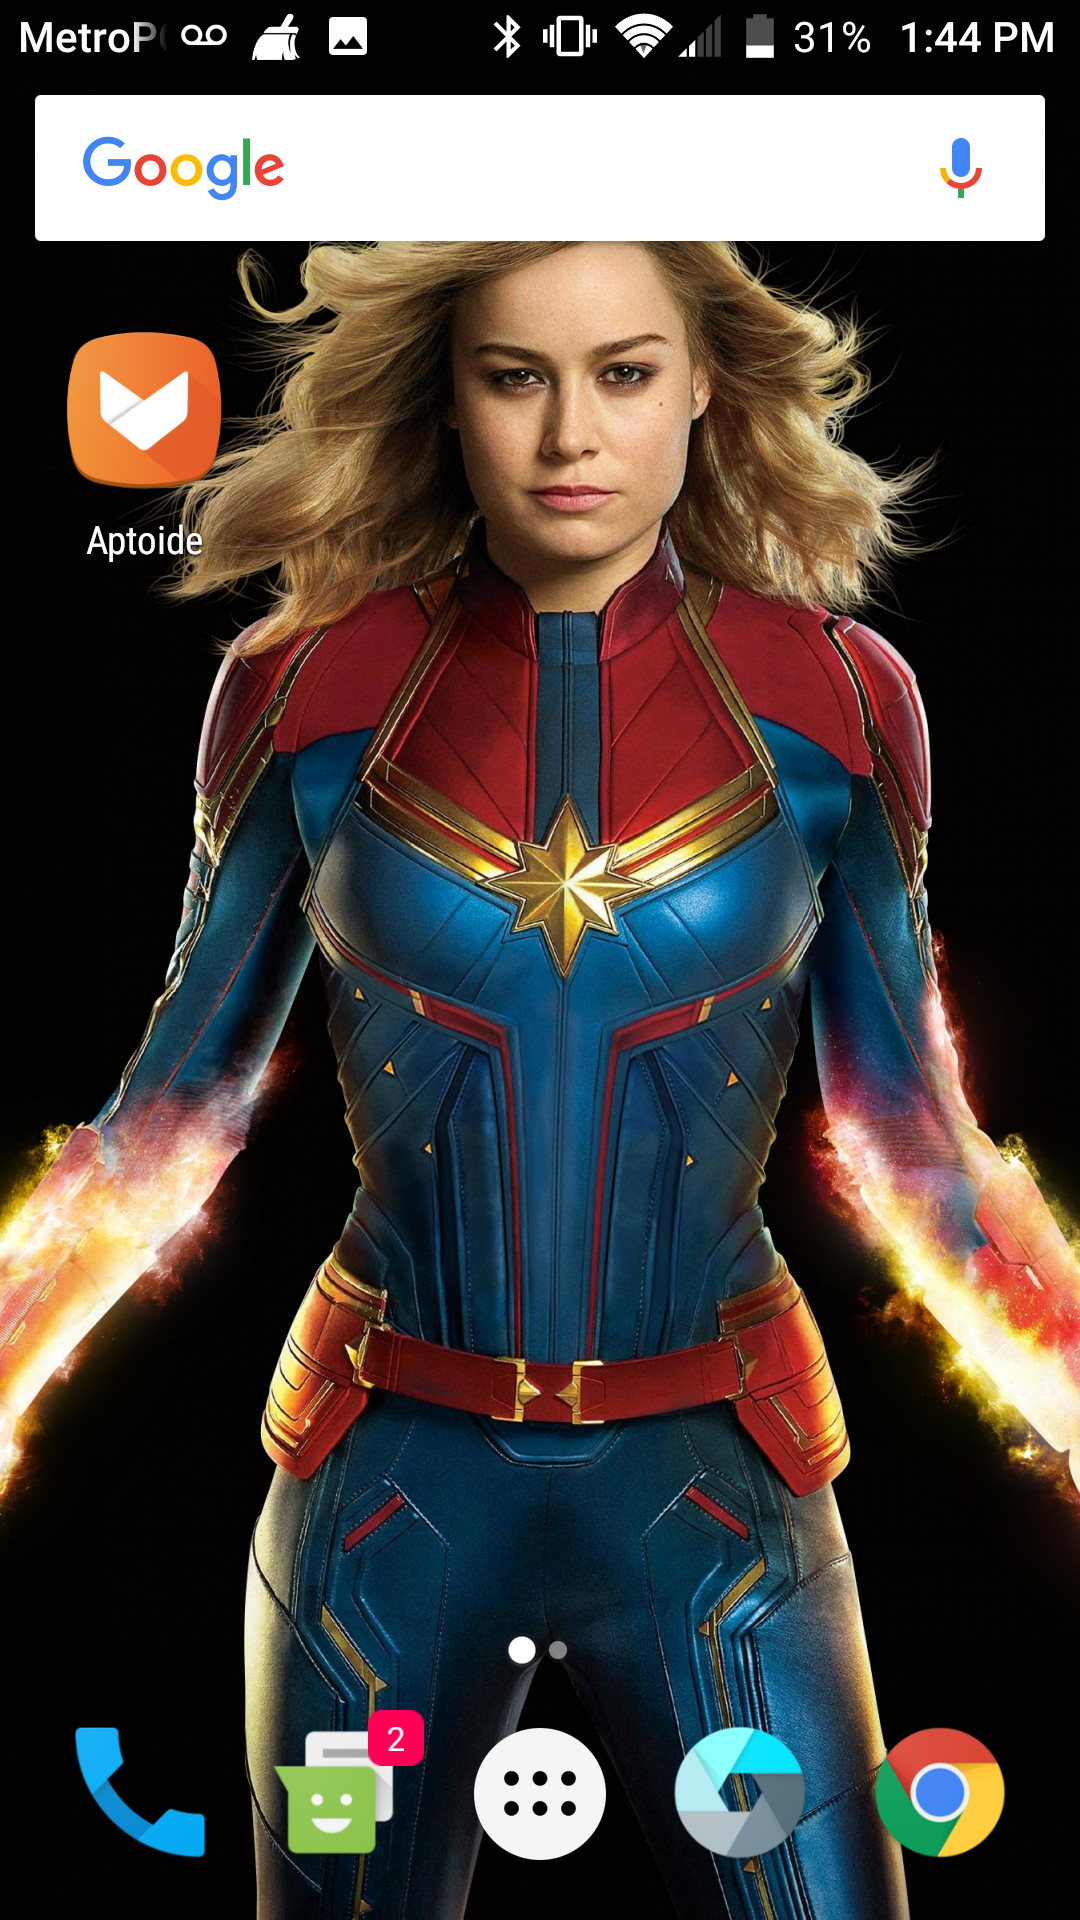 Captain Marvel Wallpapers HD has the best HD ultra HD high